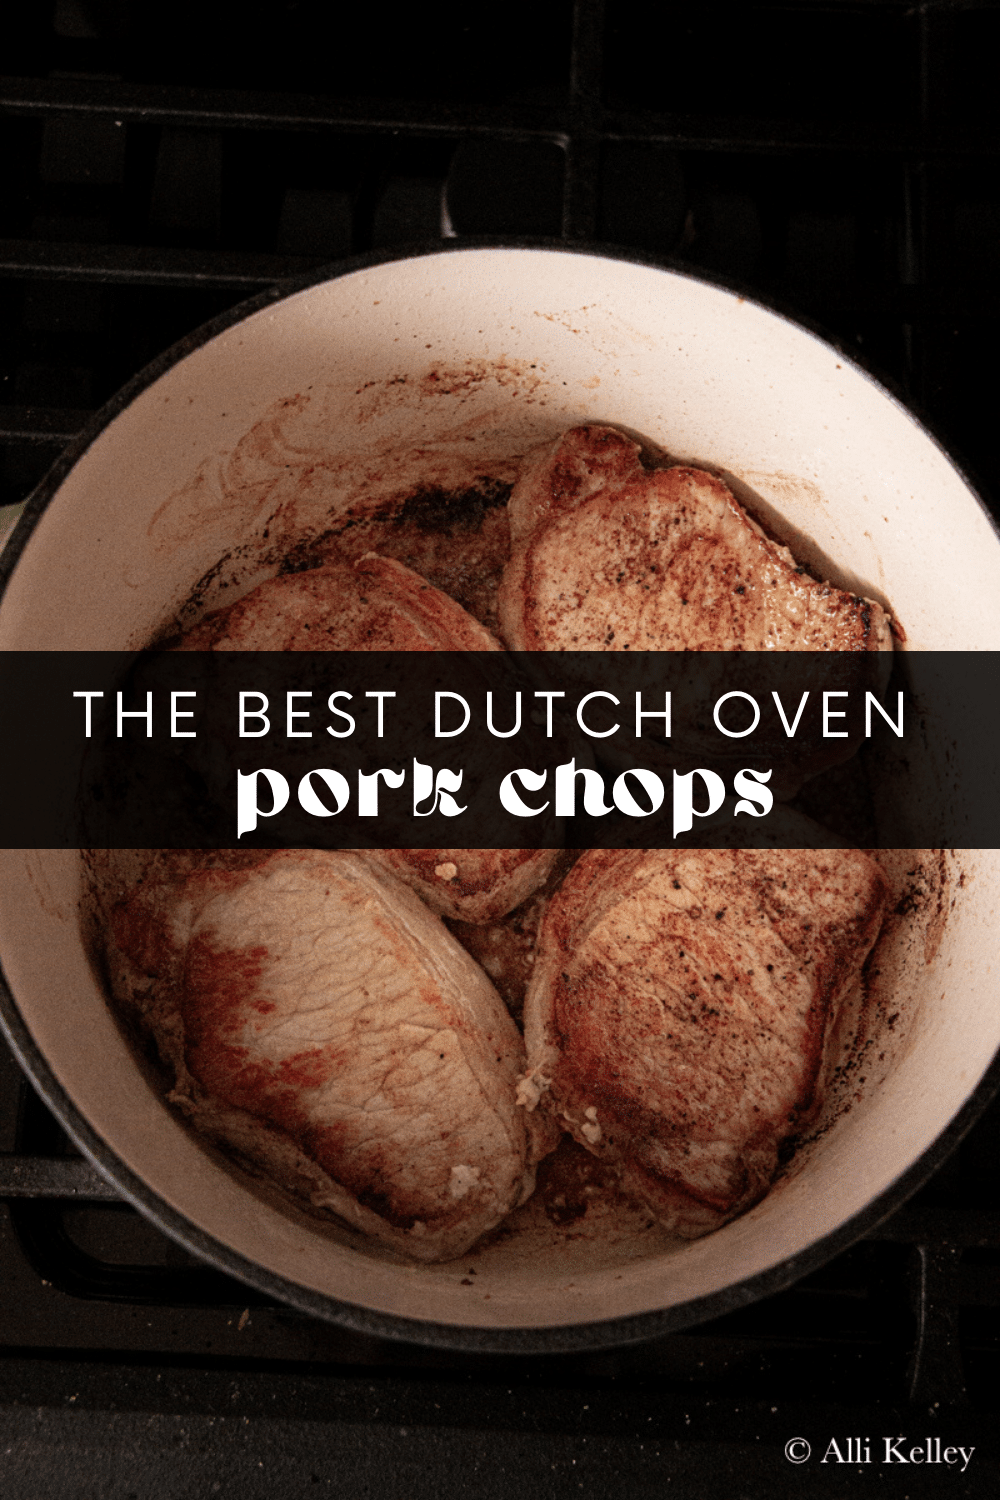 Dutch oven pork chops are a family favorite and make the best weeknight dinner! A creamy white wine sauce coats tender, juicy pork chops for a dish that’s delicious and easy to make. The honey and mustard are the secret to creating a perfect balance of flavors!